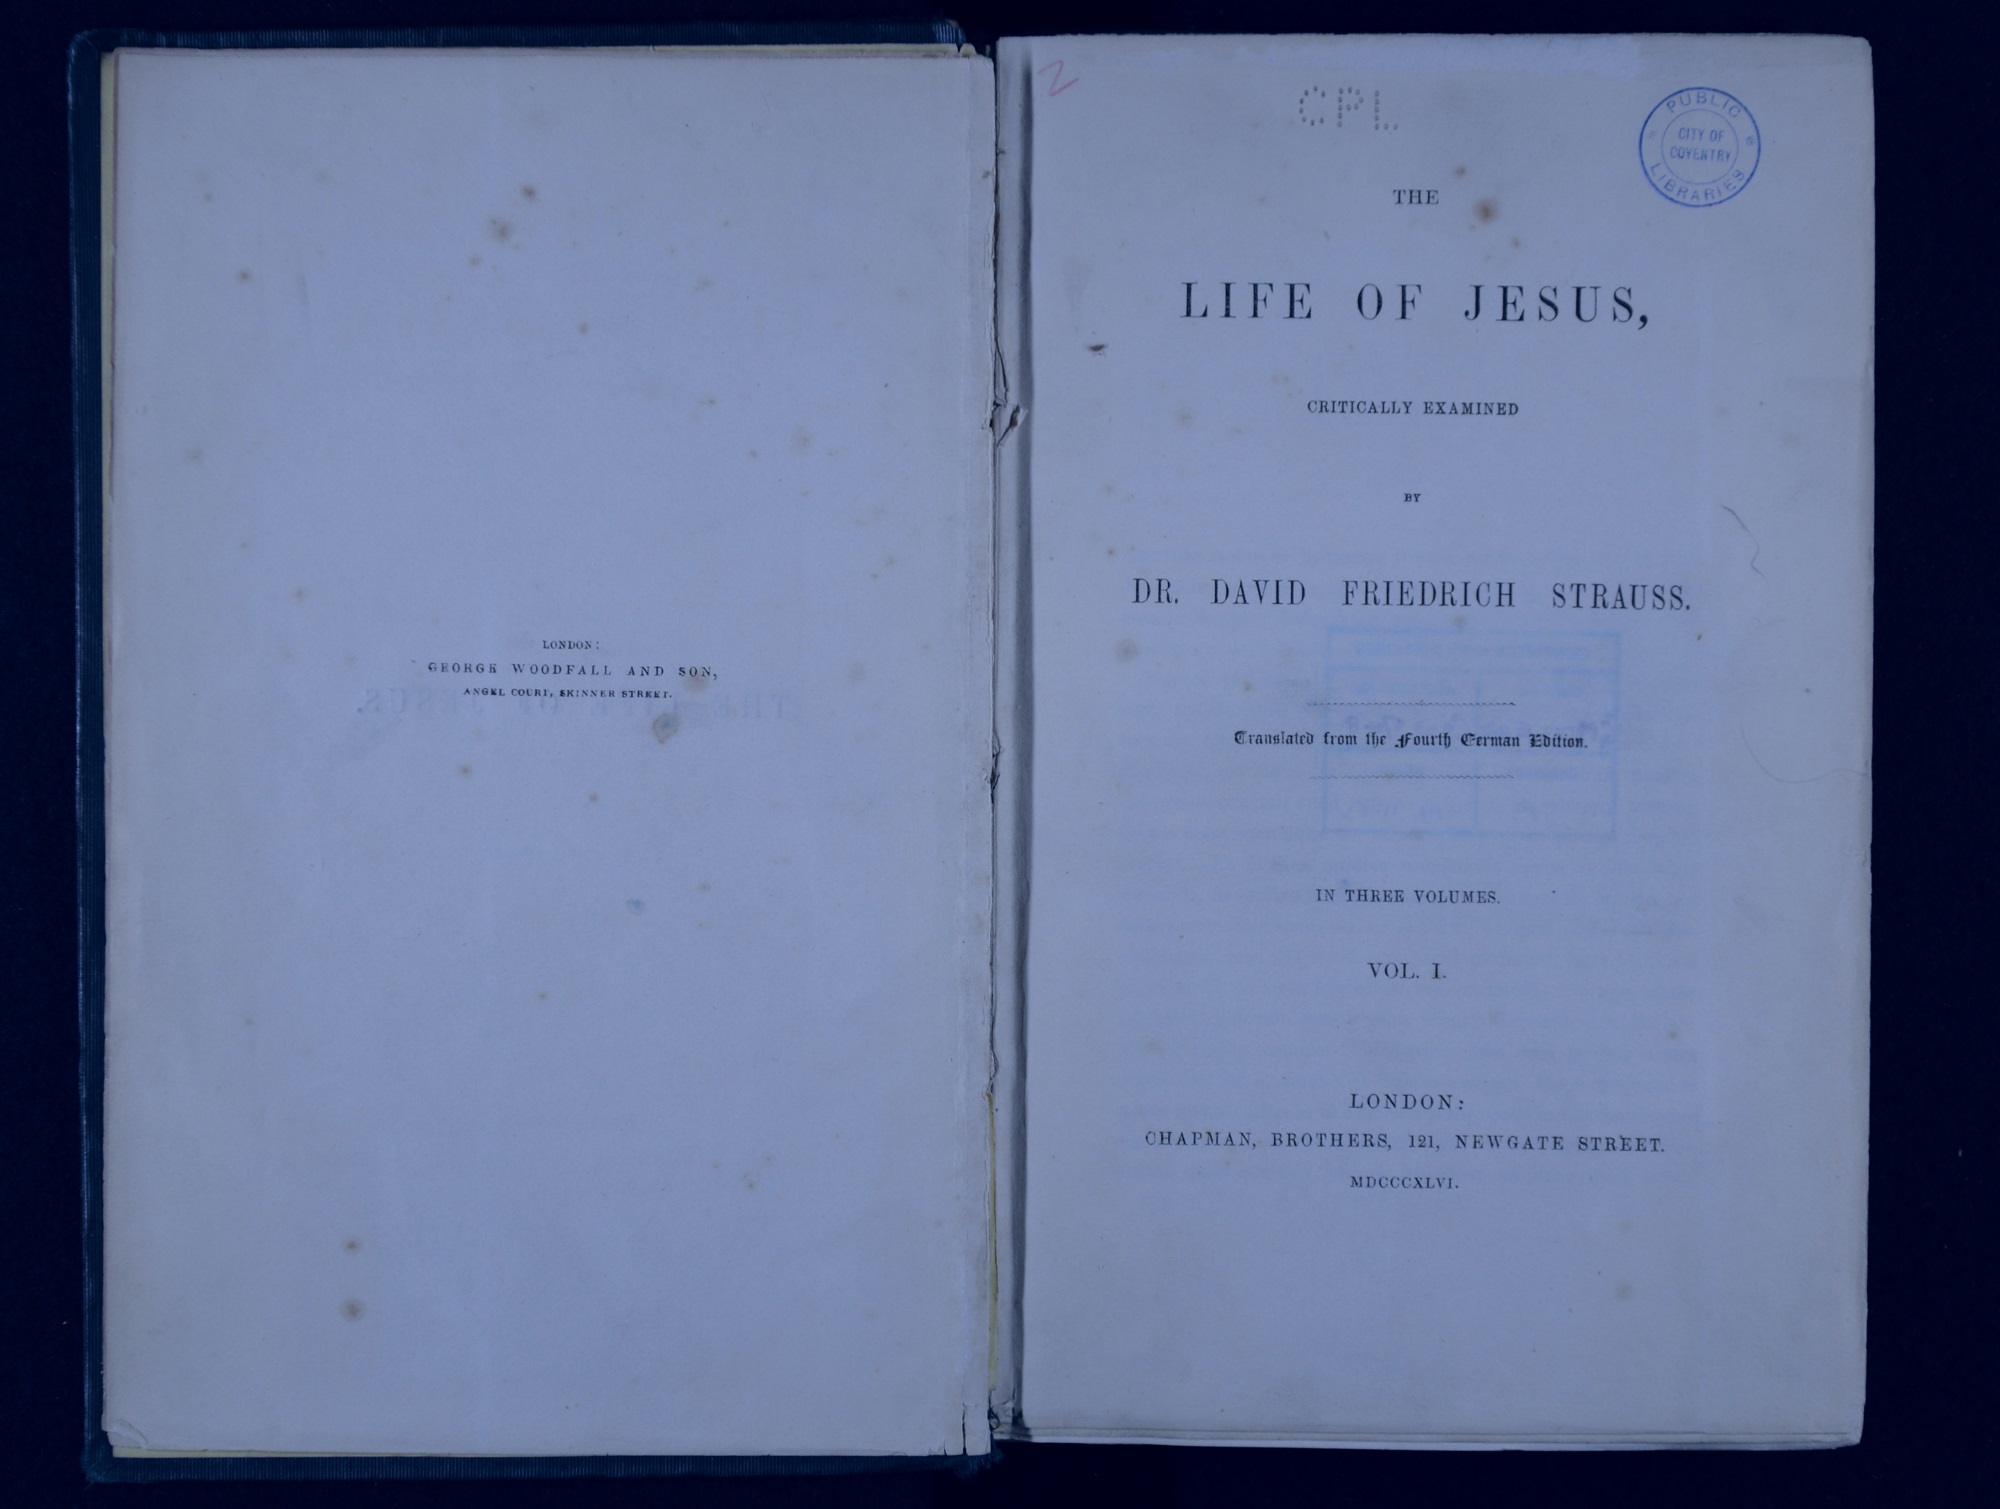 Open book showing the inner pages. The right hand page has the following text. The Life of Jesus, critically examined by Dr David Friedrich Strauss. Translated from the fourth German edition.